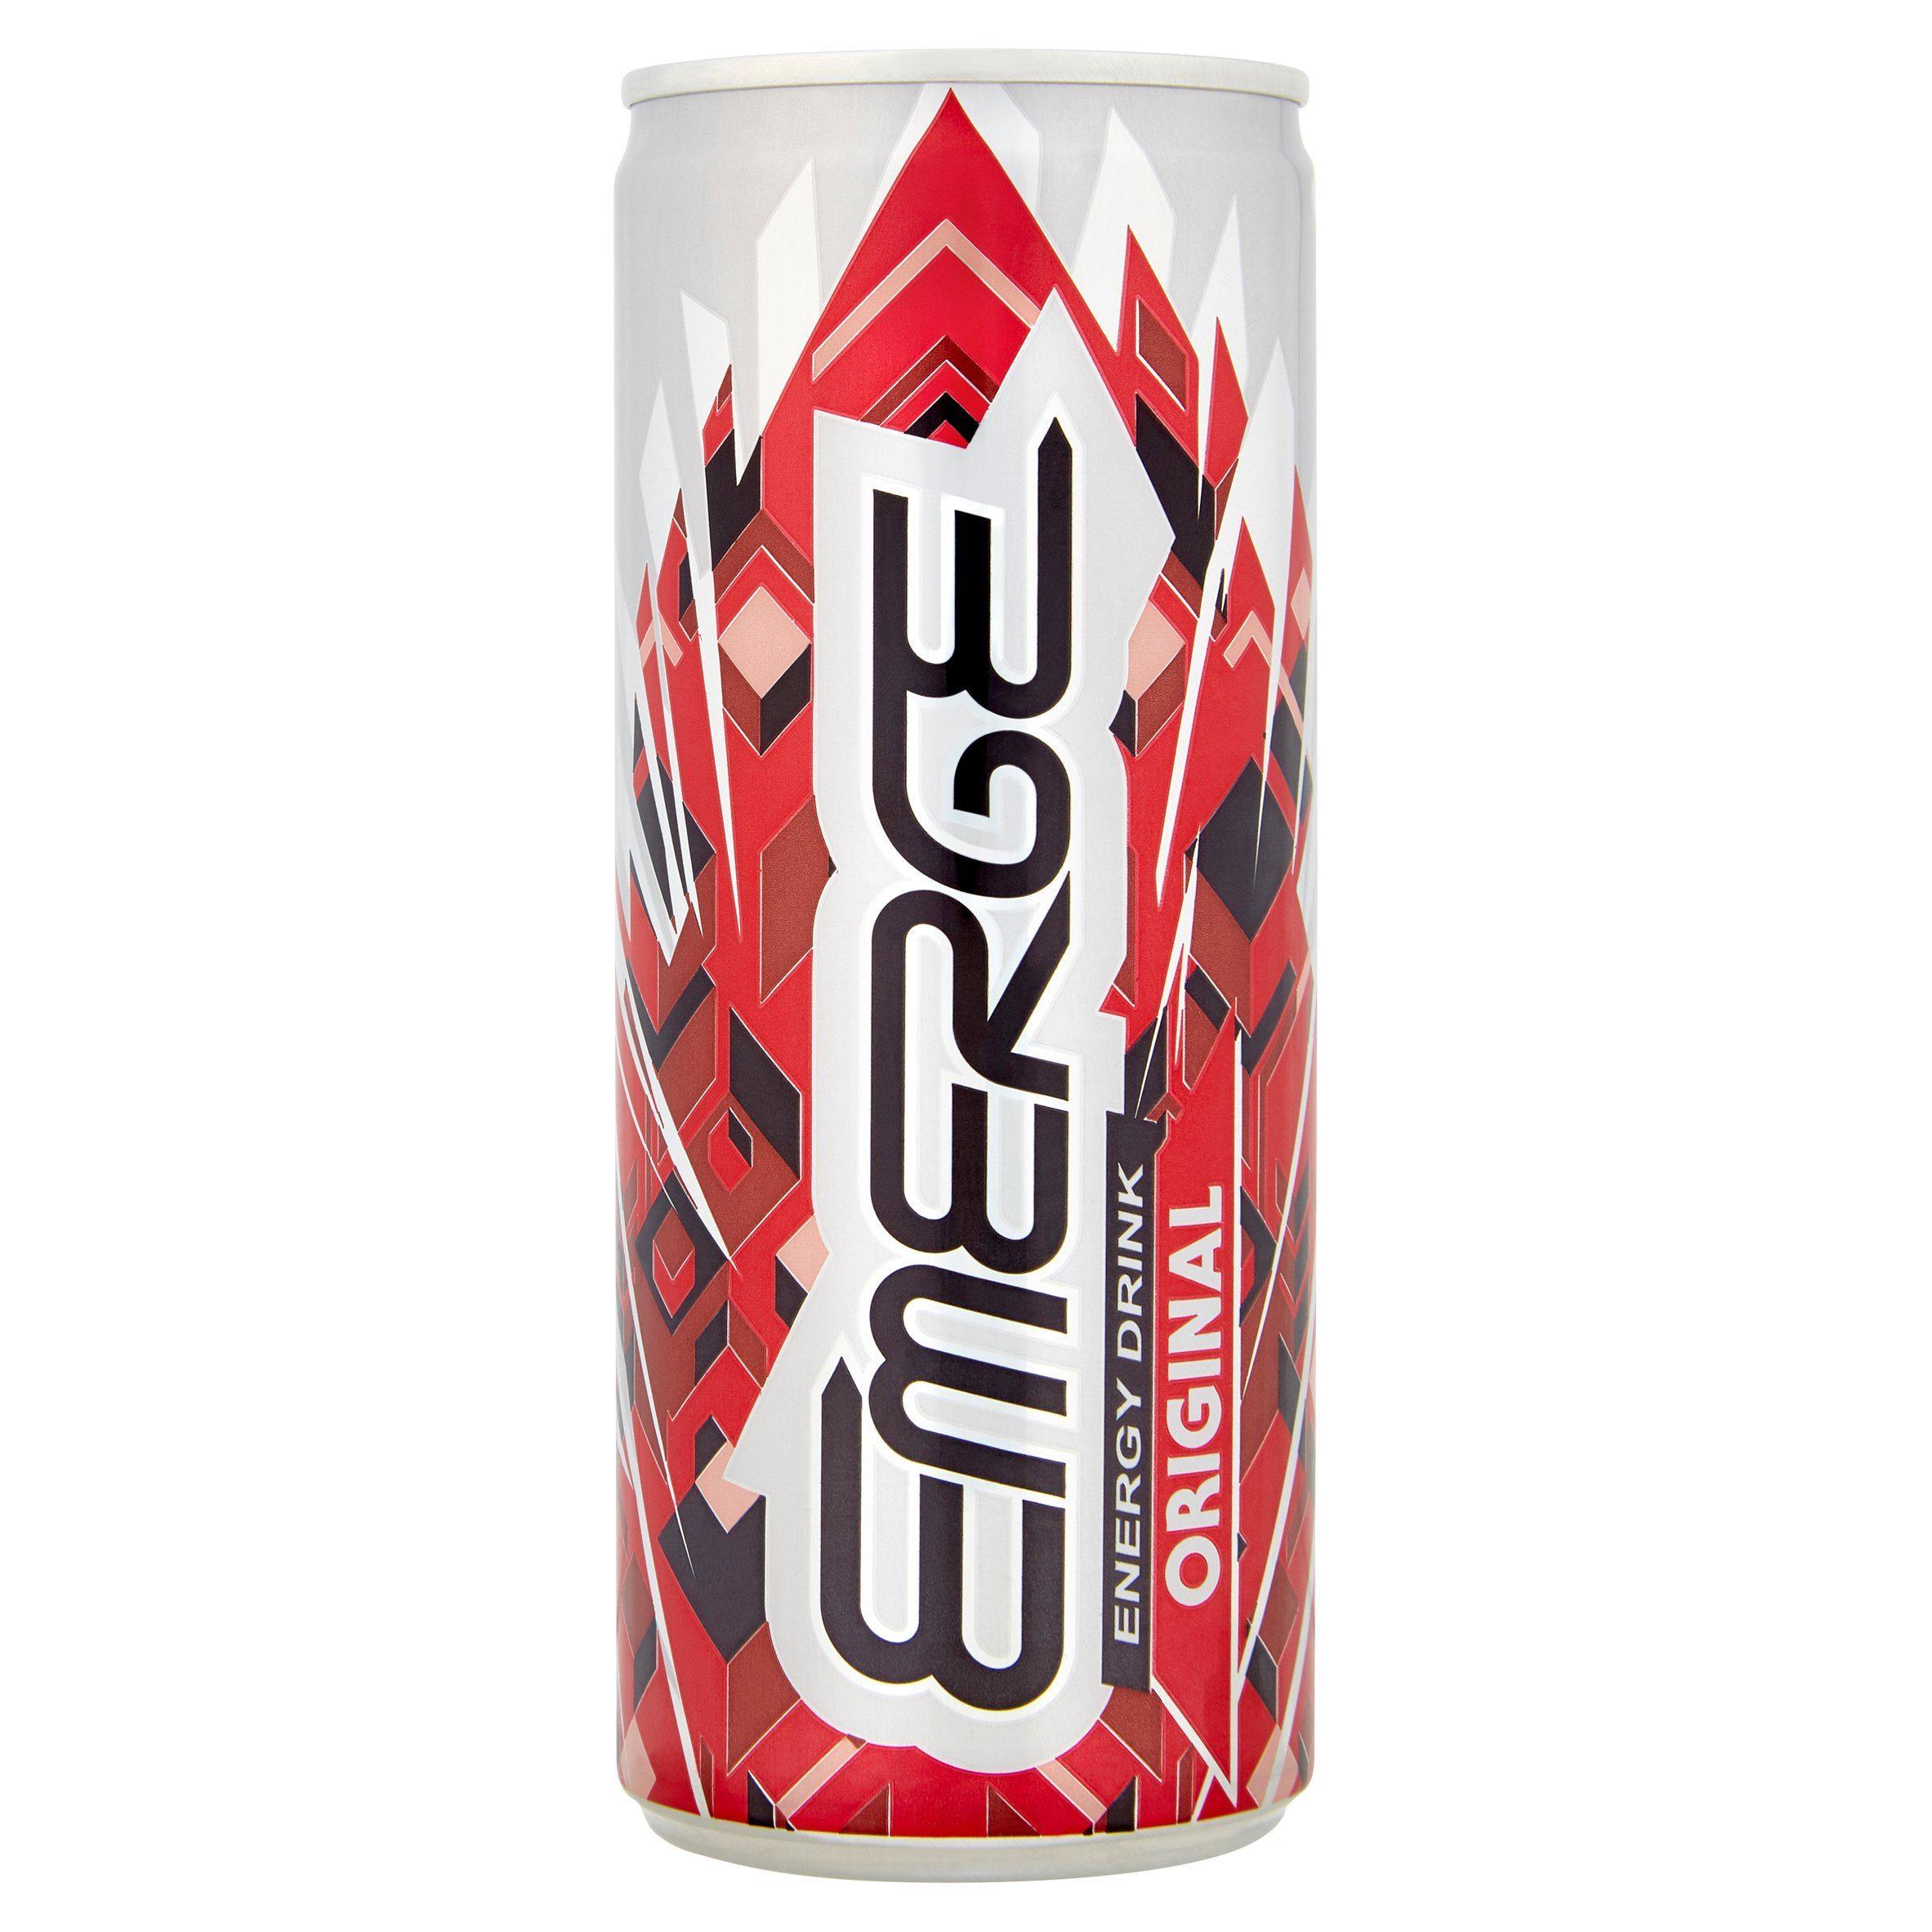 Emerge Energy Original Drink Cans - 24 x 250ml - Vending Superstore